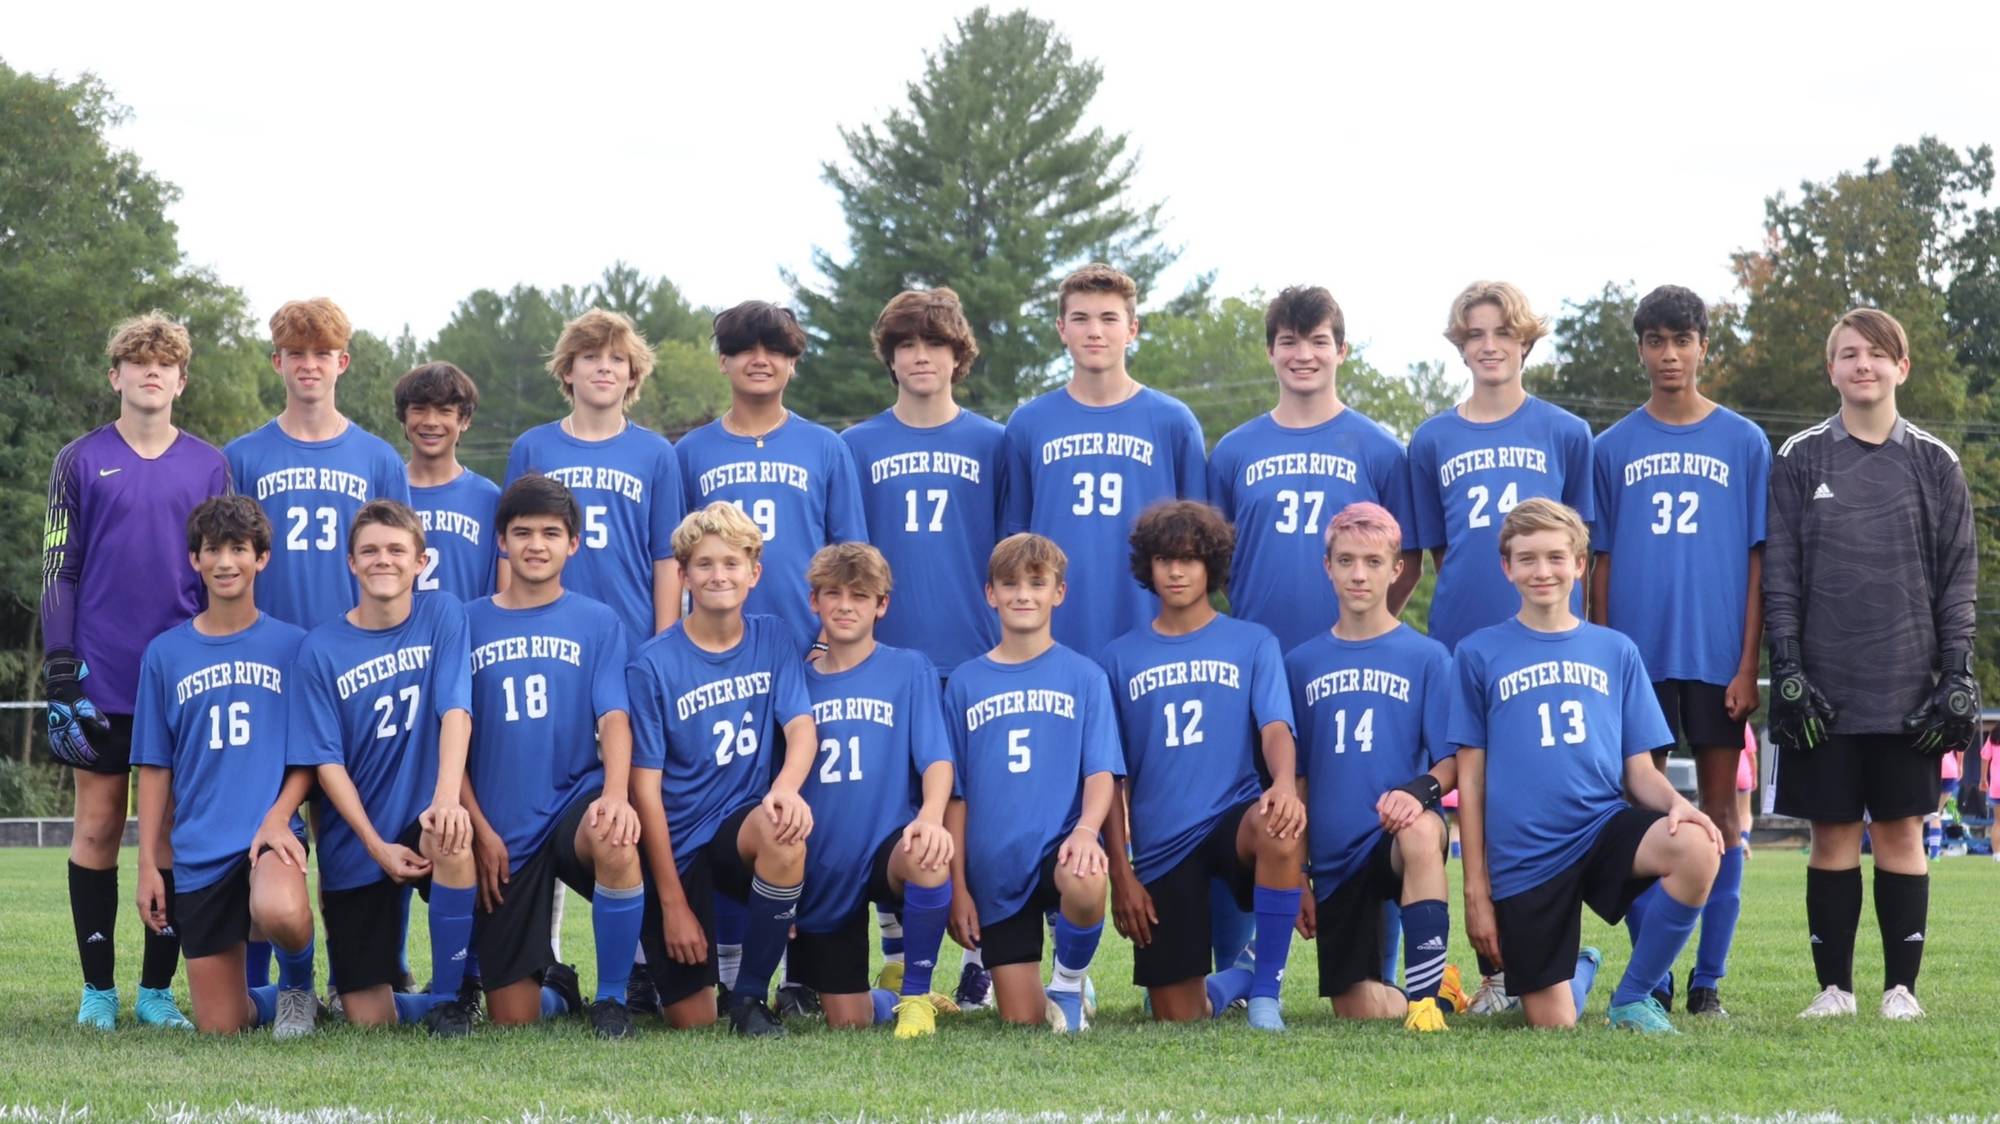 Reserve Boys Soccer - Content Image for oysterriverhighschool_bigteams_21556